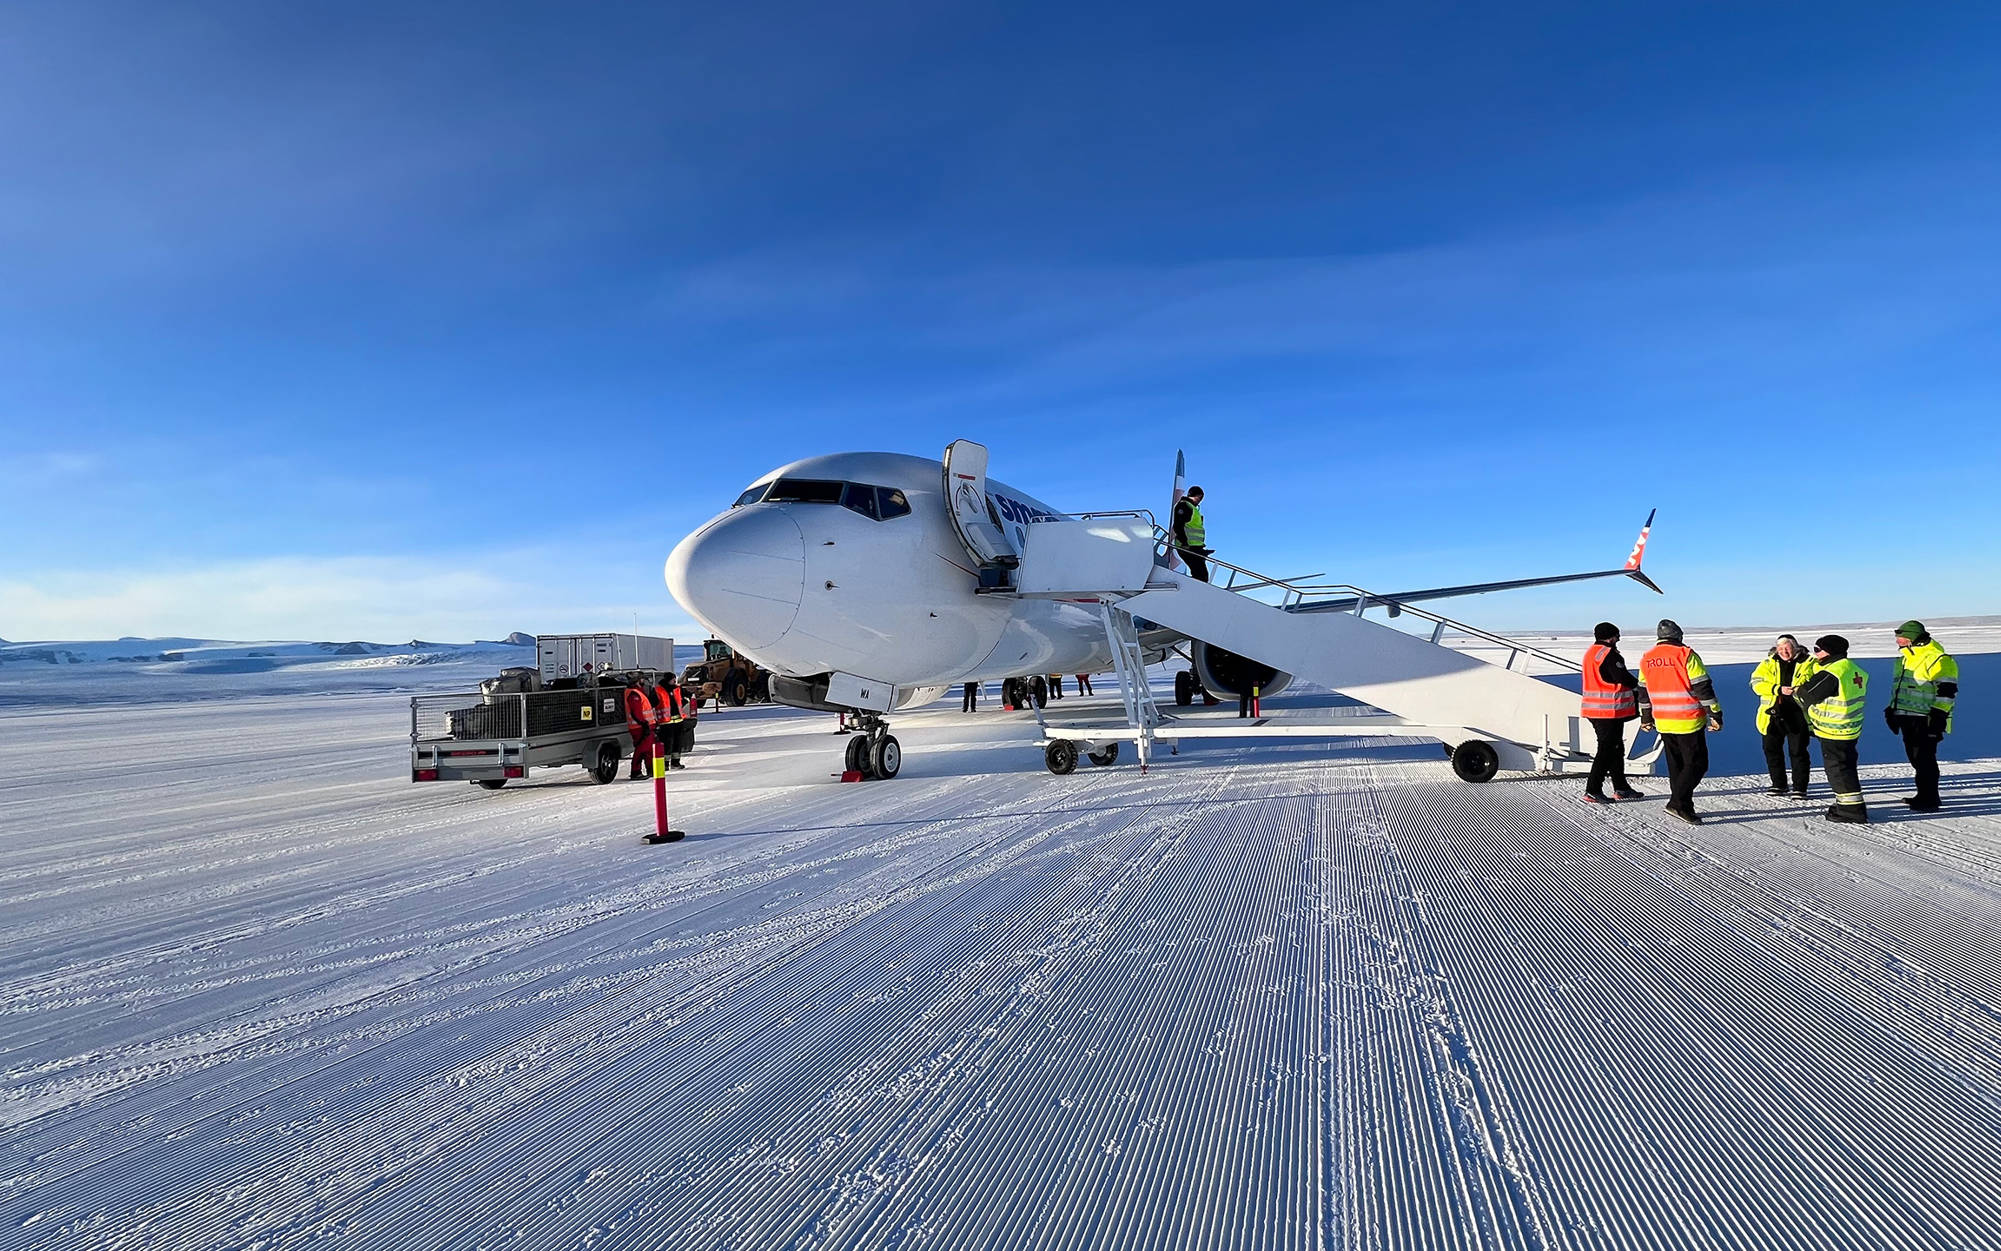 Airplane on ice in Antarctica